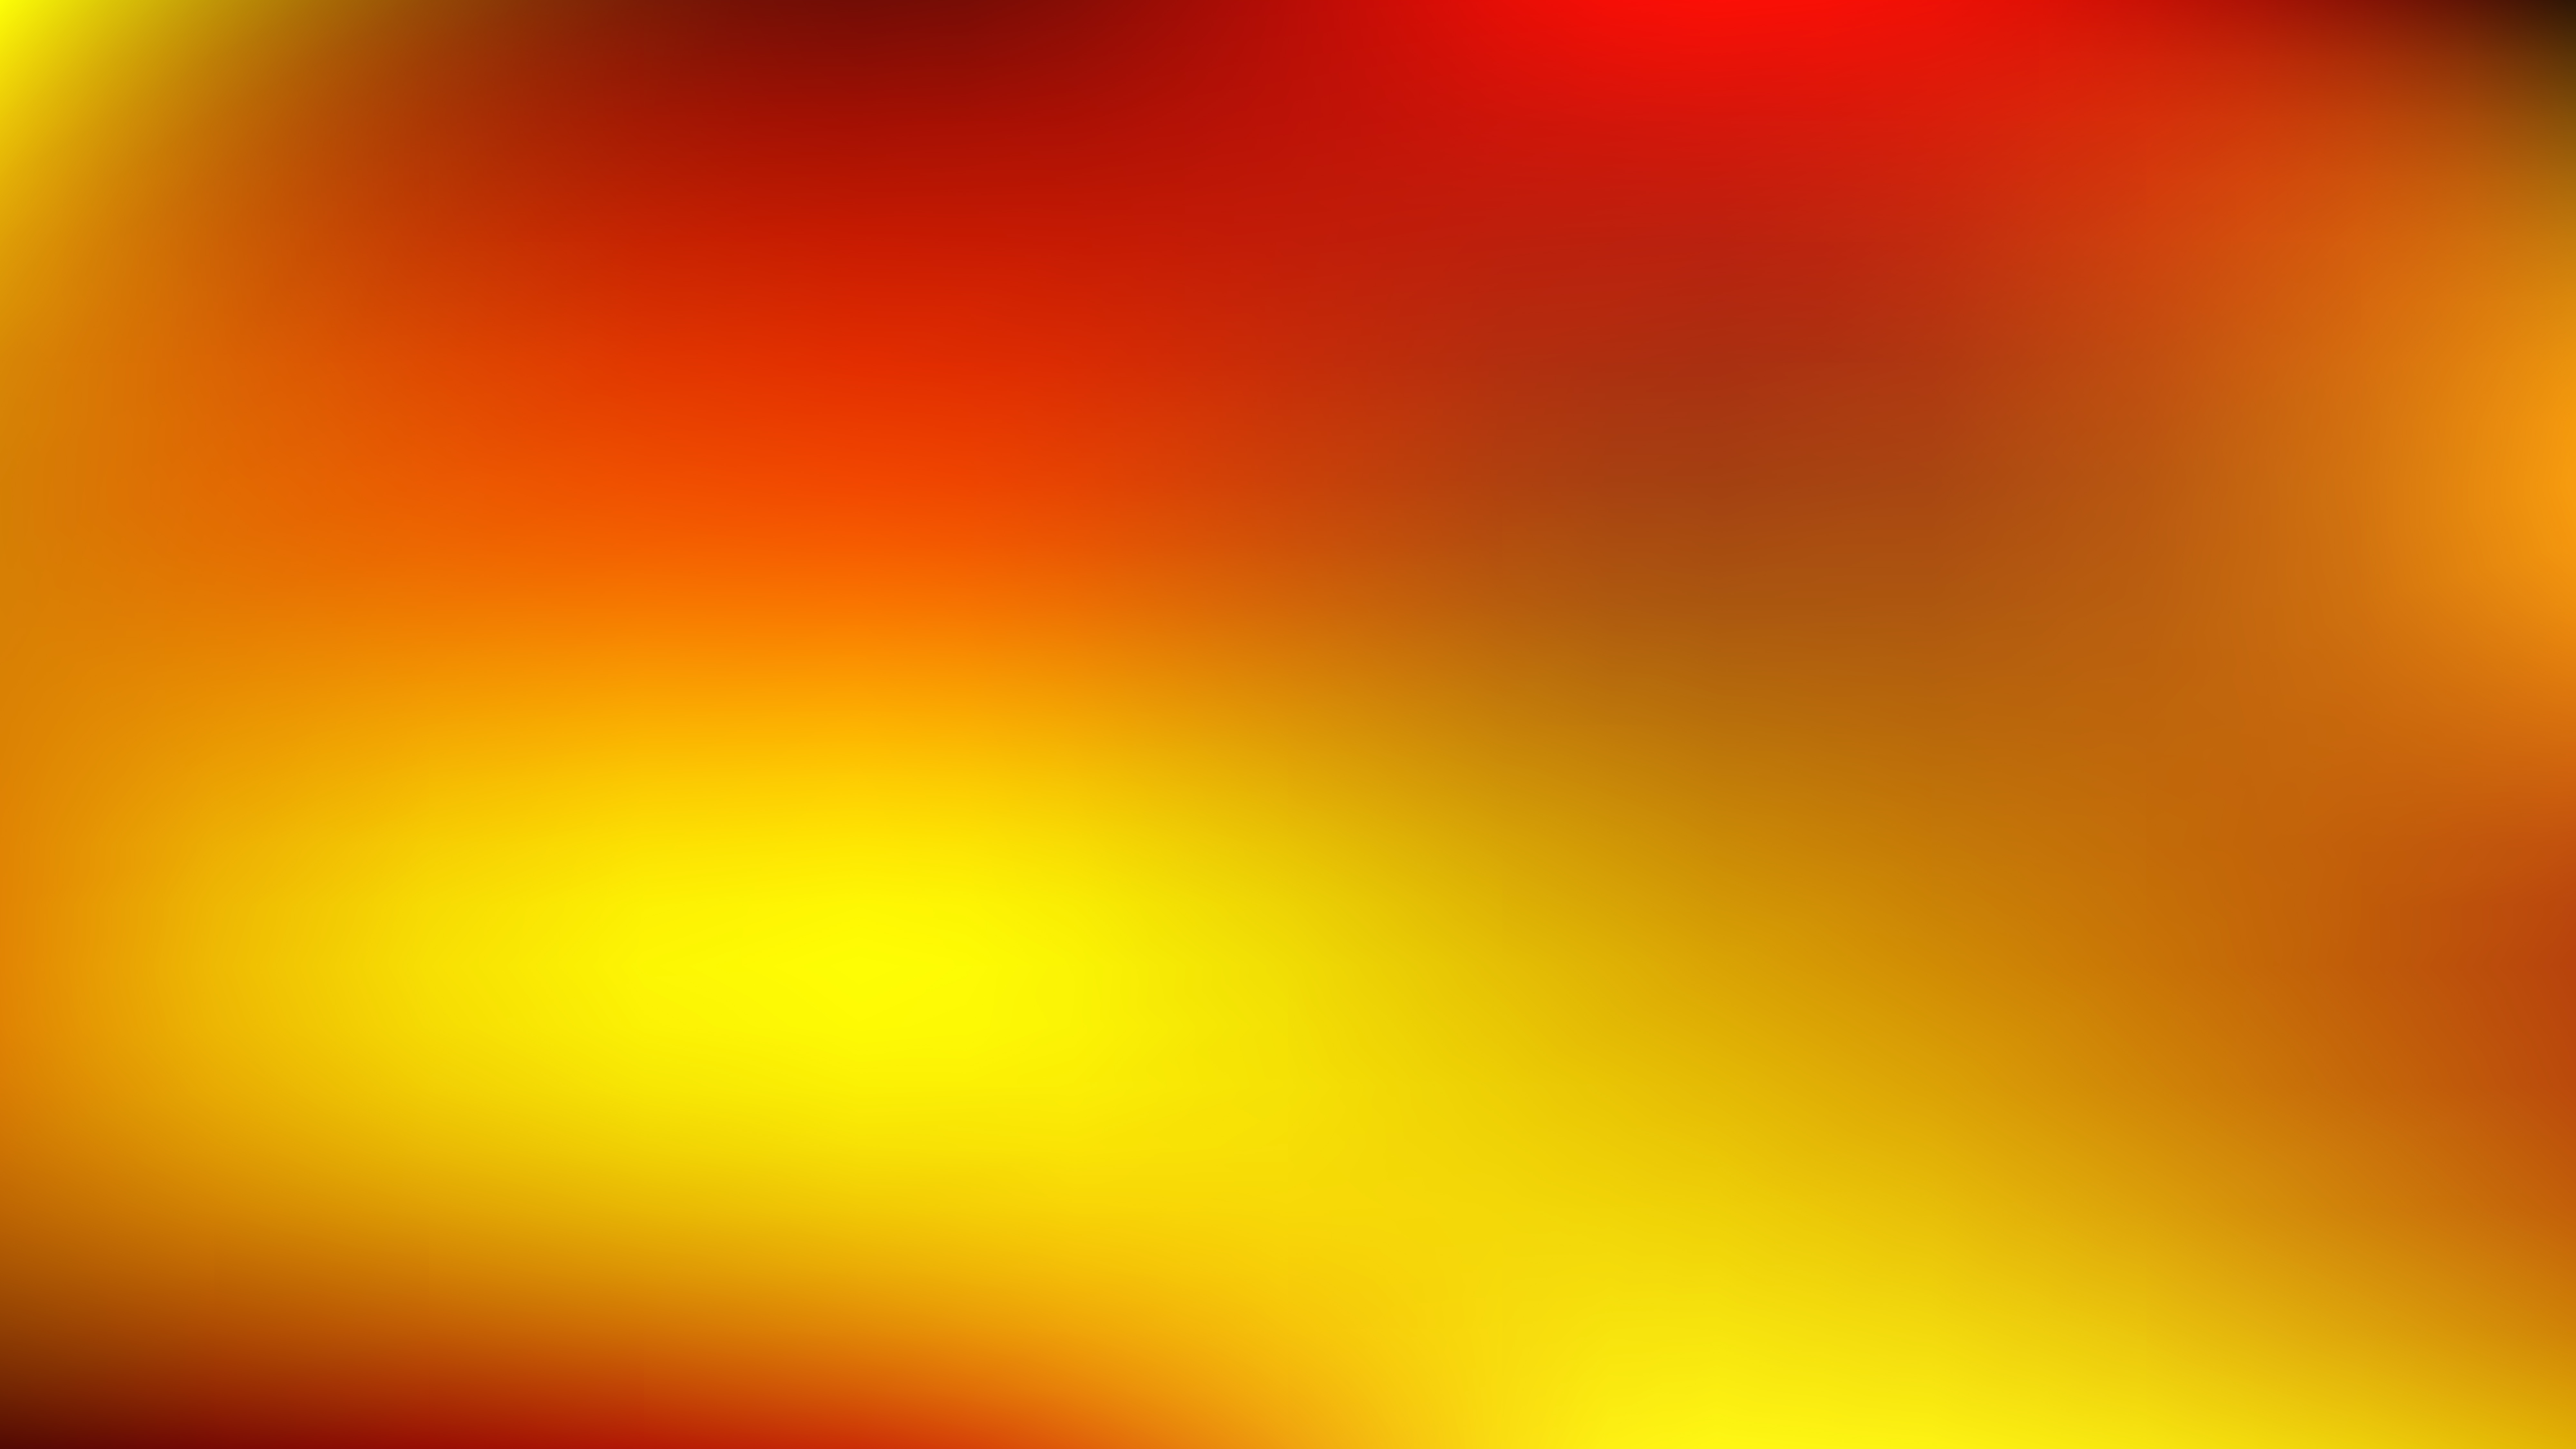 Free Red and Yellow Gaussian Blur Background Vector Art